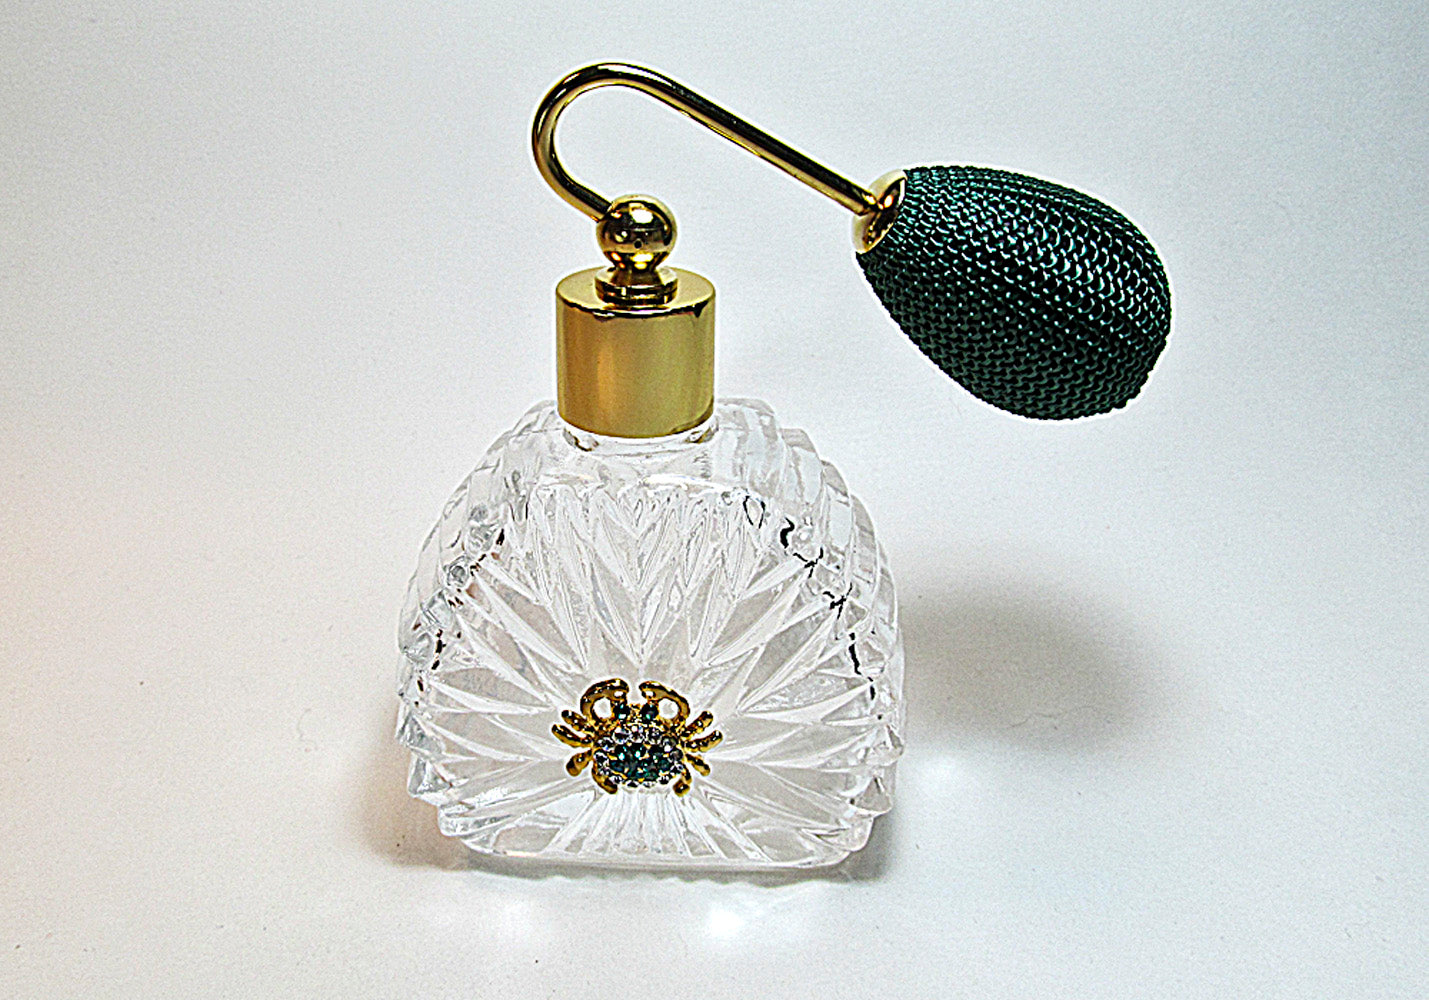 Unique Perfume Crystal Glass Bottle With Green Bulb Spray Attachment. (New!)